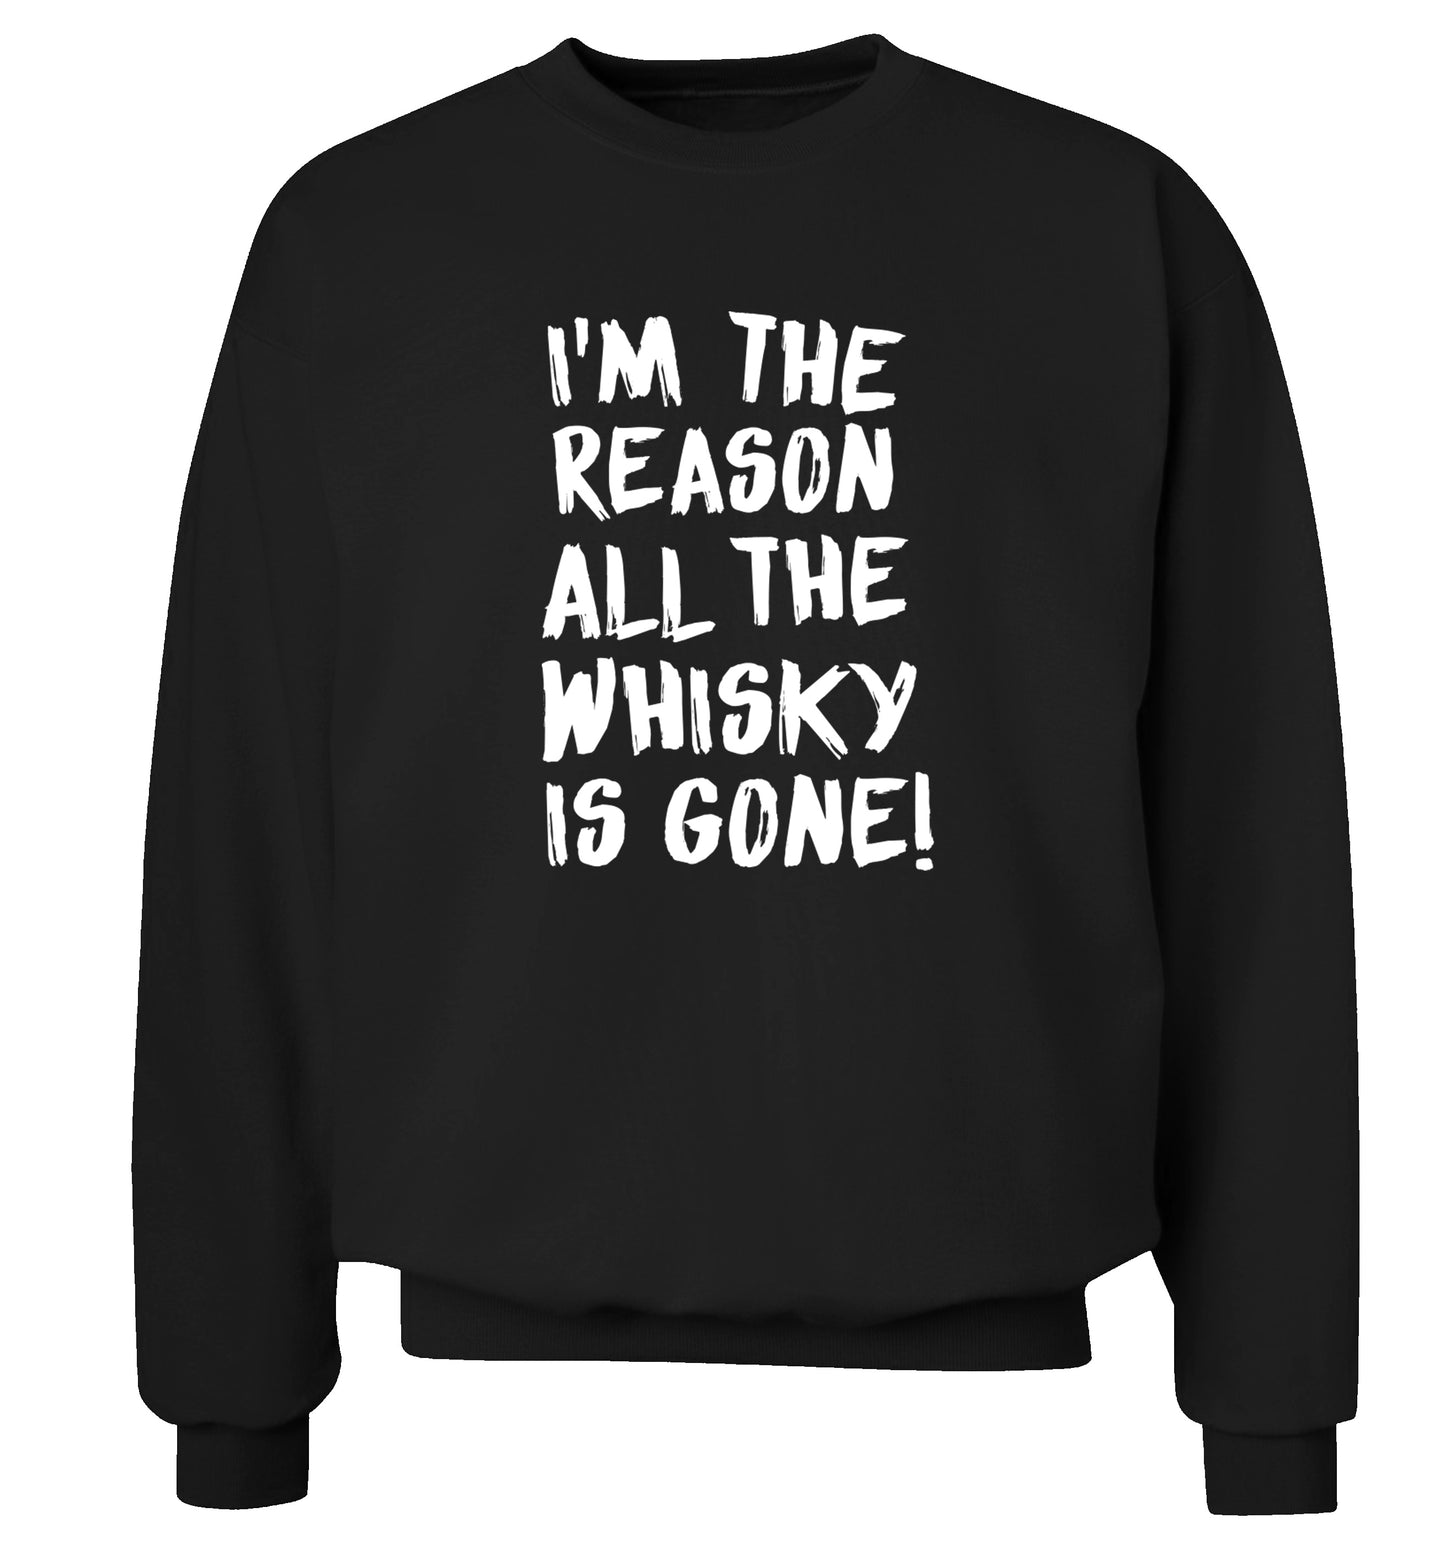 I'm the reason all the whisky is gone Adult's unisex black Sweater 2XL